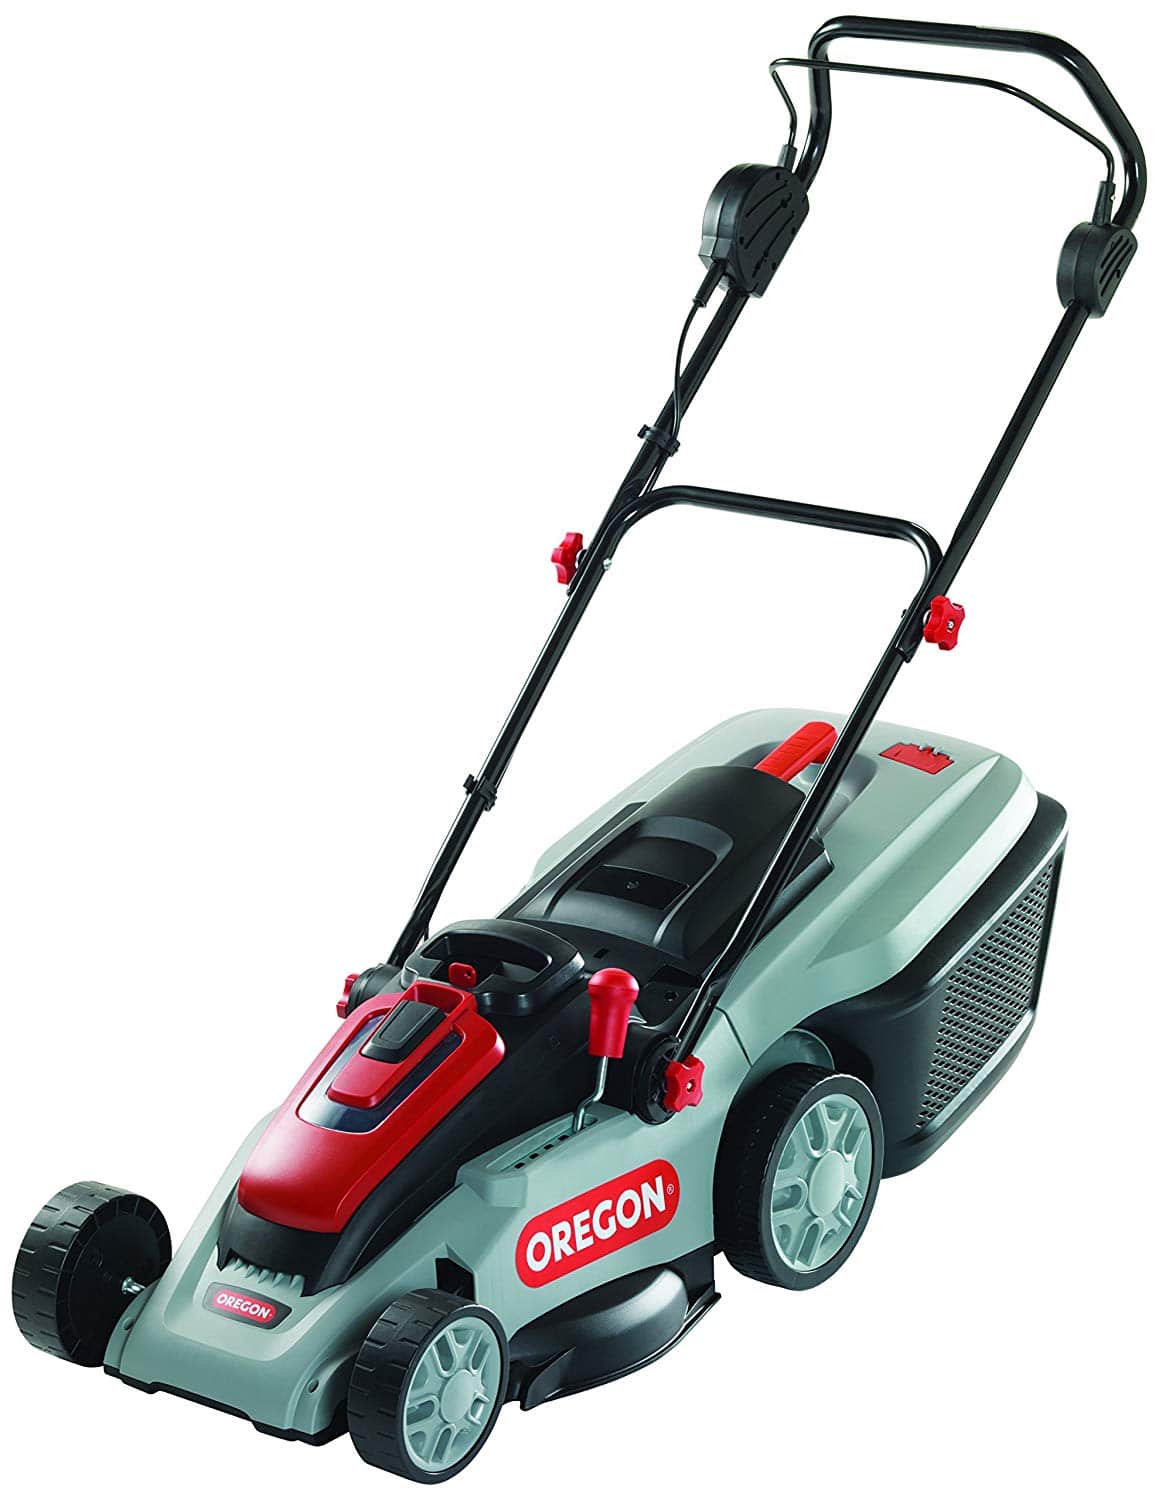 Top 10 Best Electric Lawn Mowers in 2021 - Top Best Pro Review